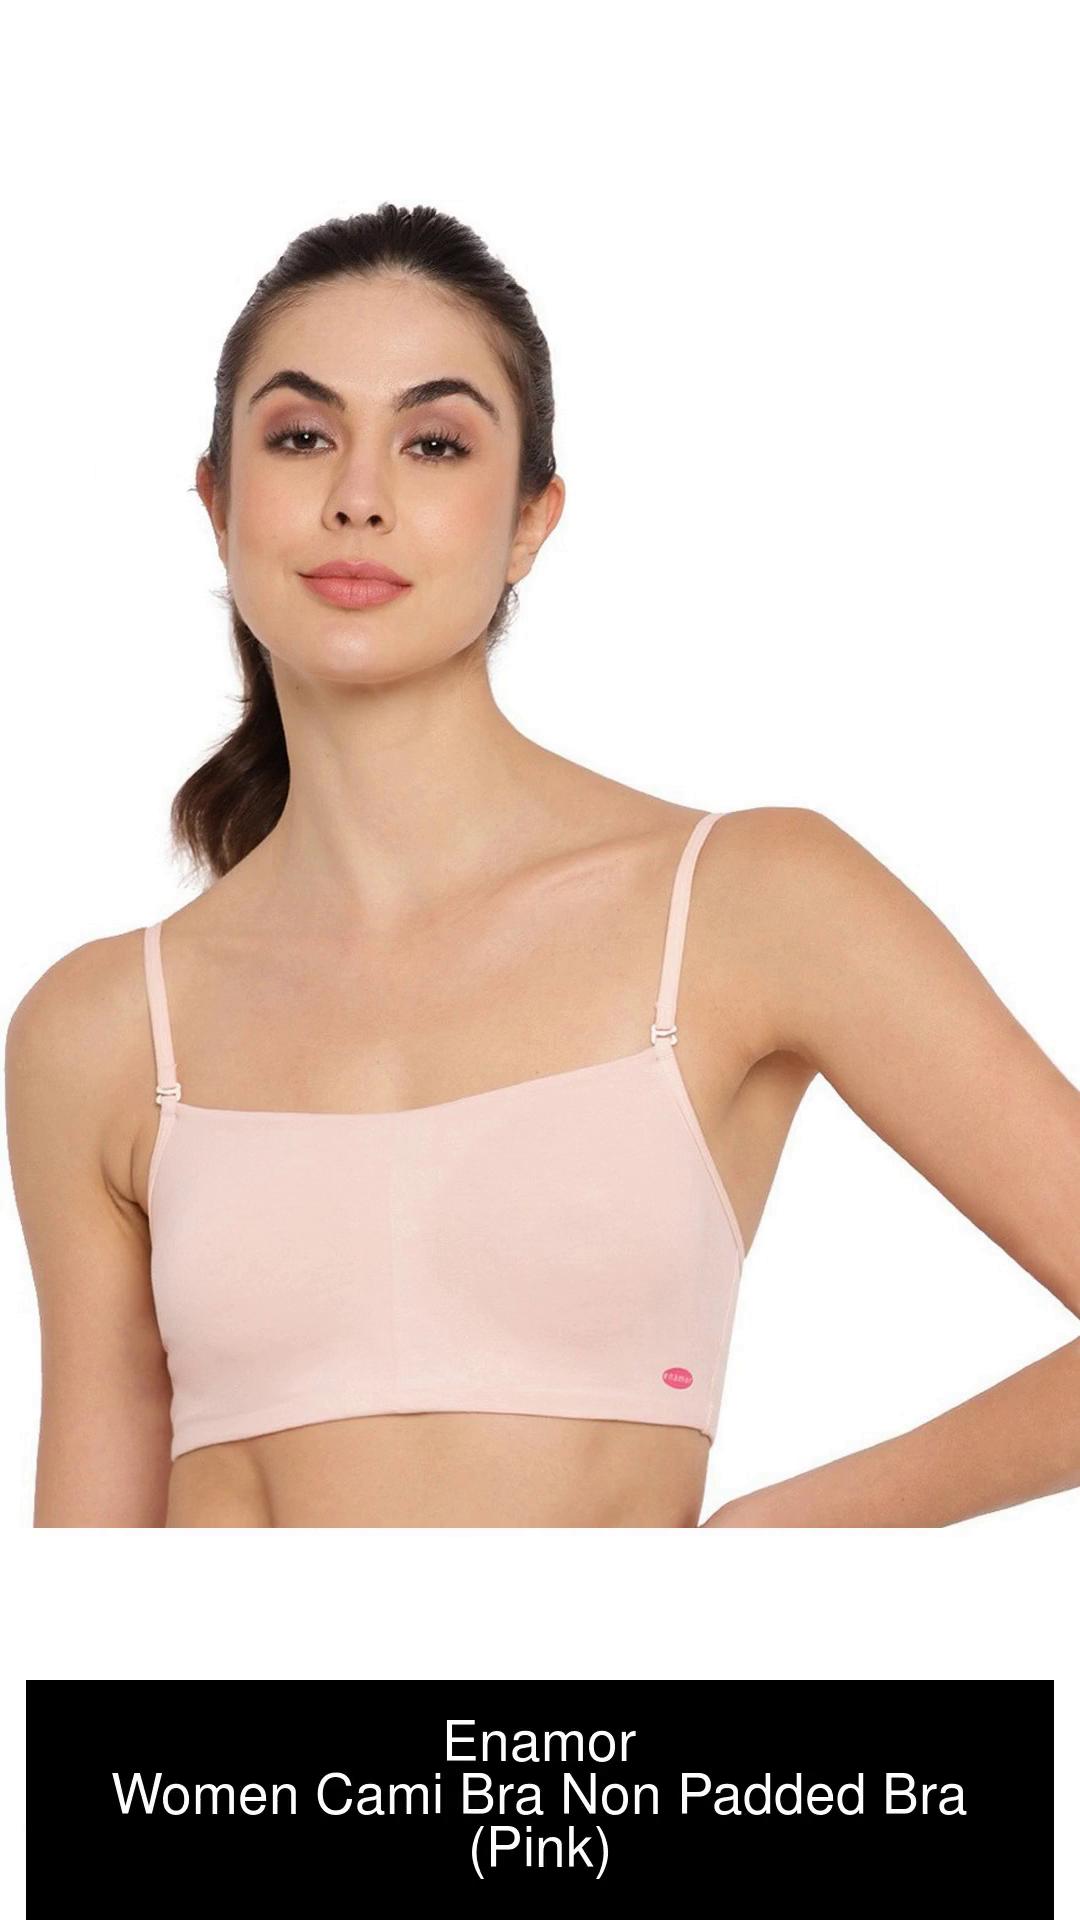 Enamor Full Coverage, Wirefree A022 Comfort Cami Cotton Women Cami